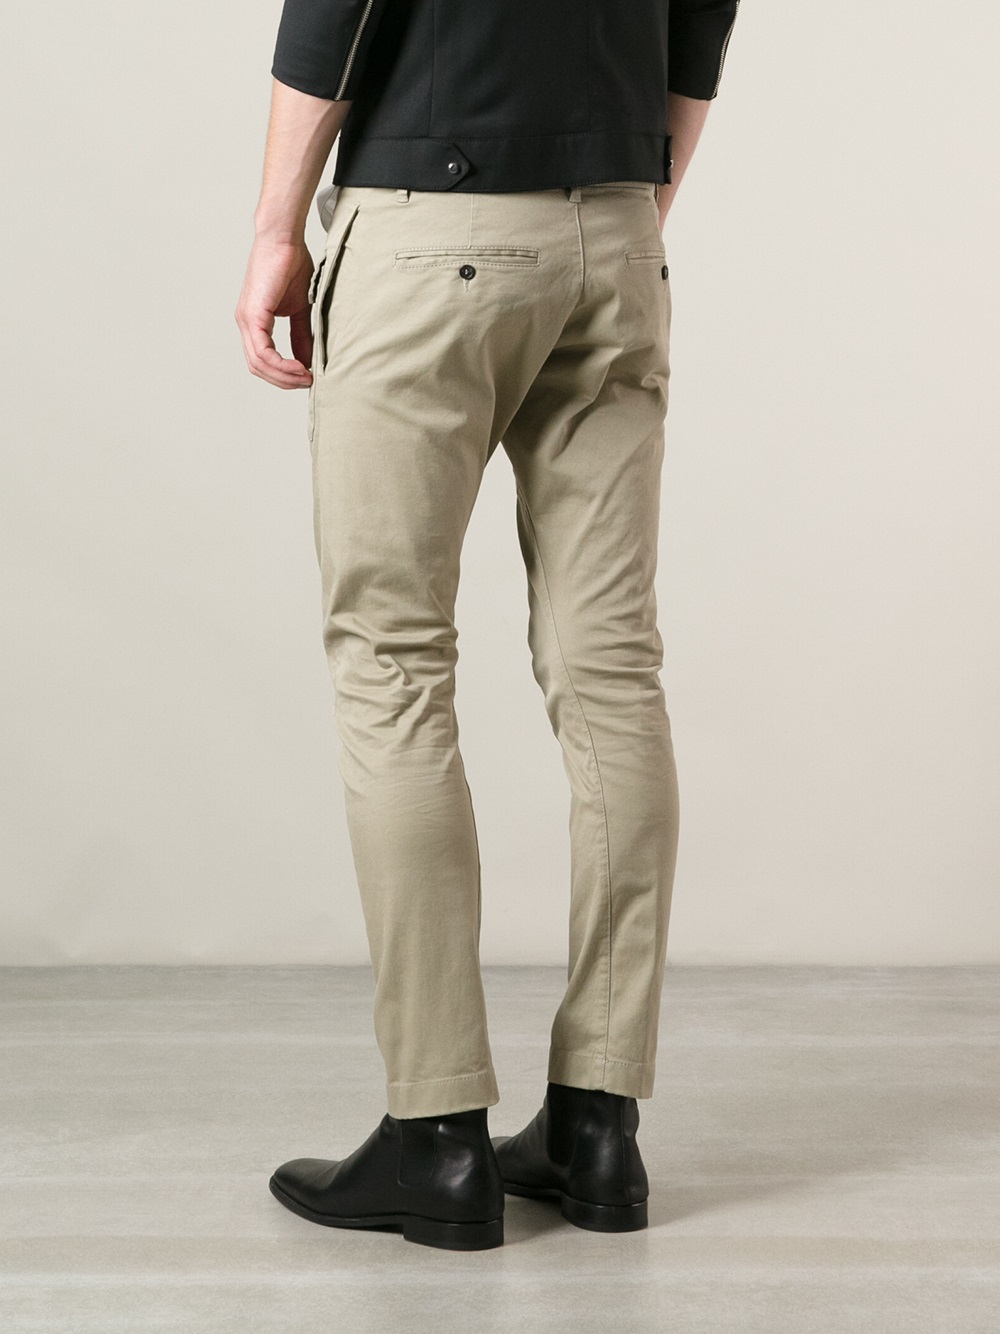 DSquared² Flap Pocket Chino in Natural for Men | Lyst